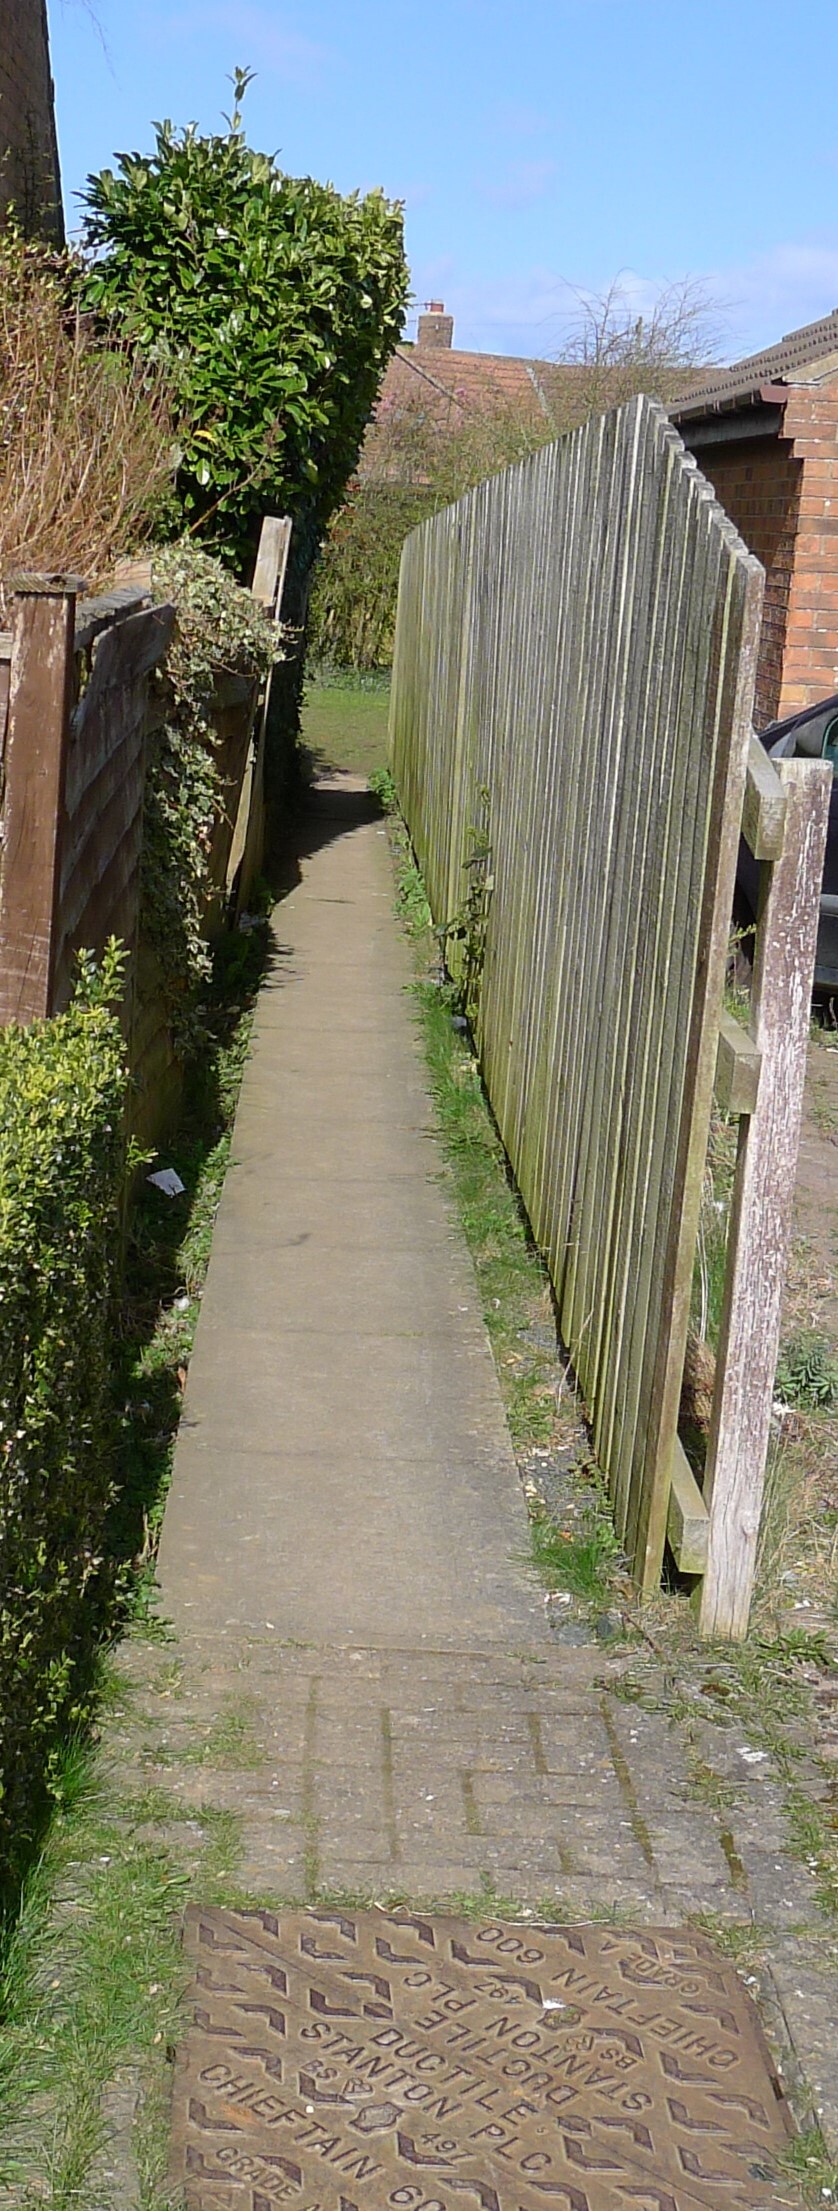 Percy Road to 'Green Lane' footpath, Hunmanby